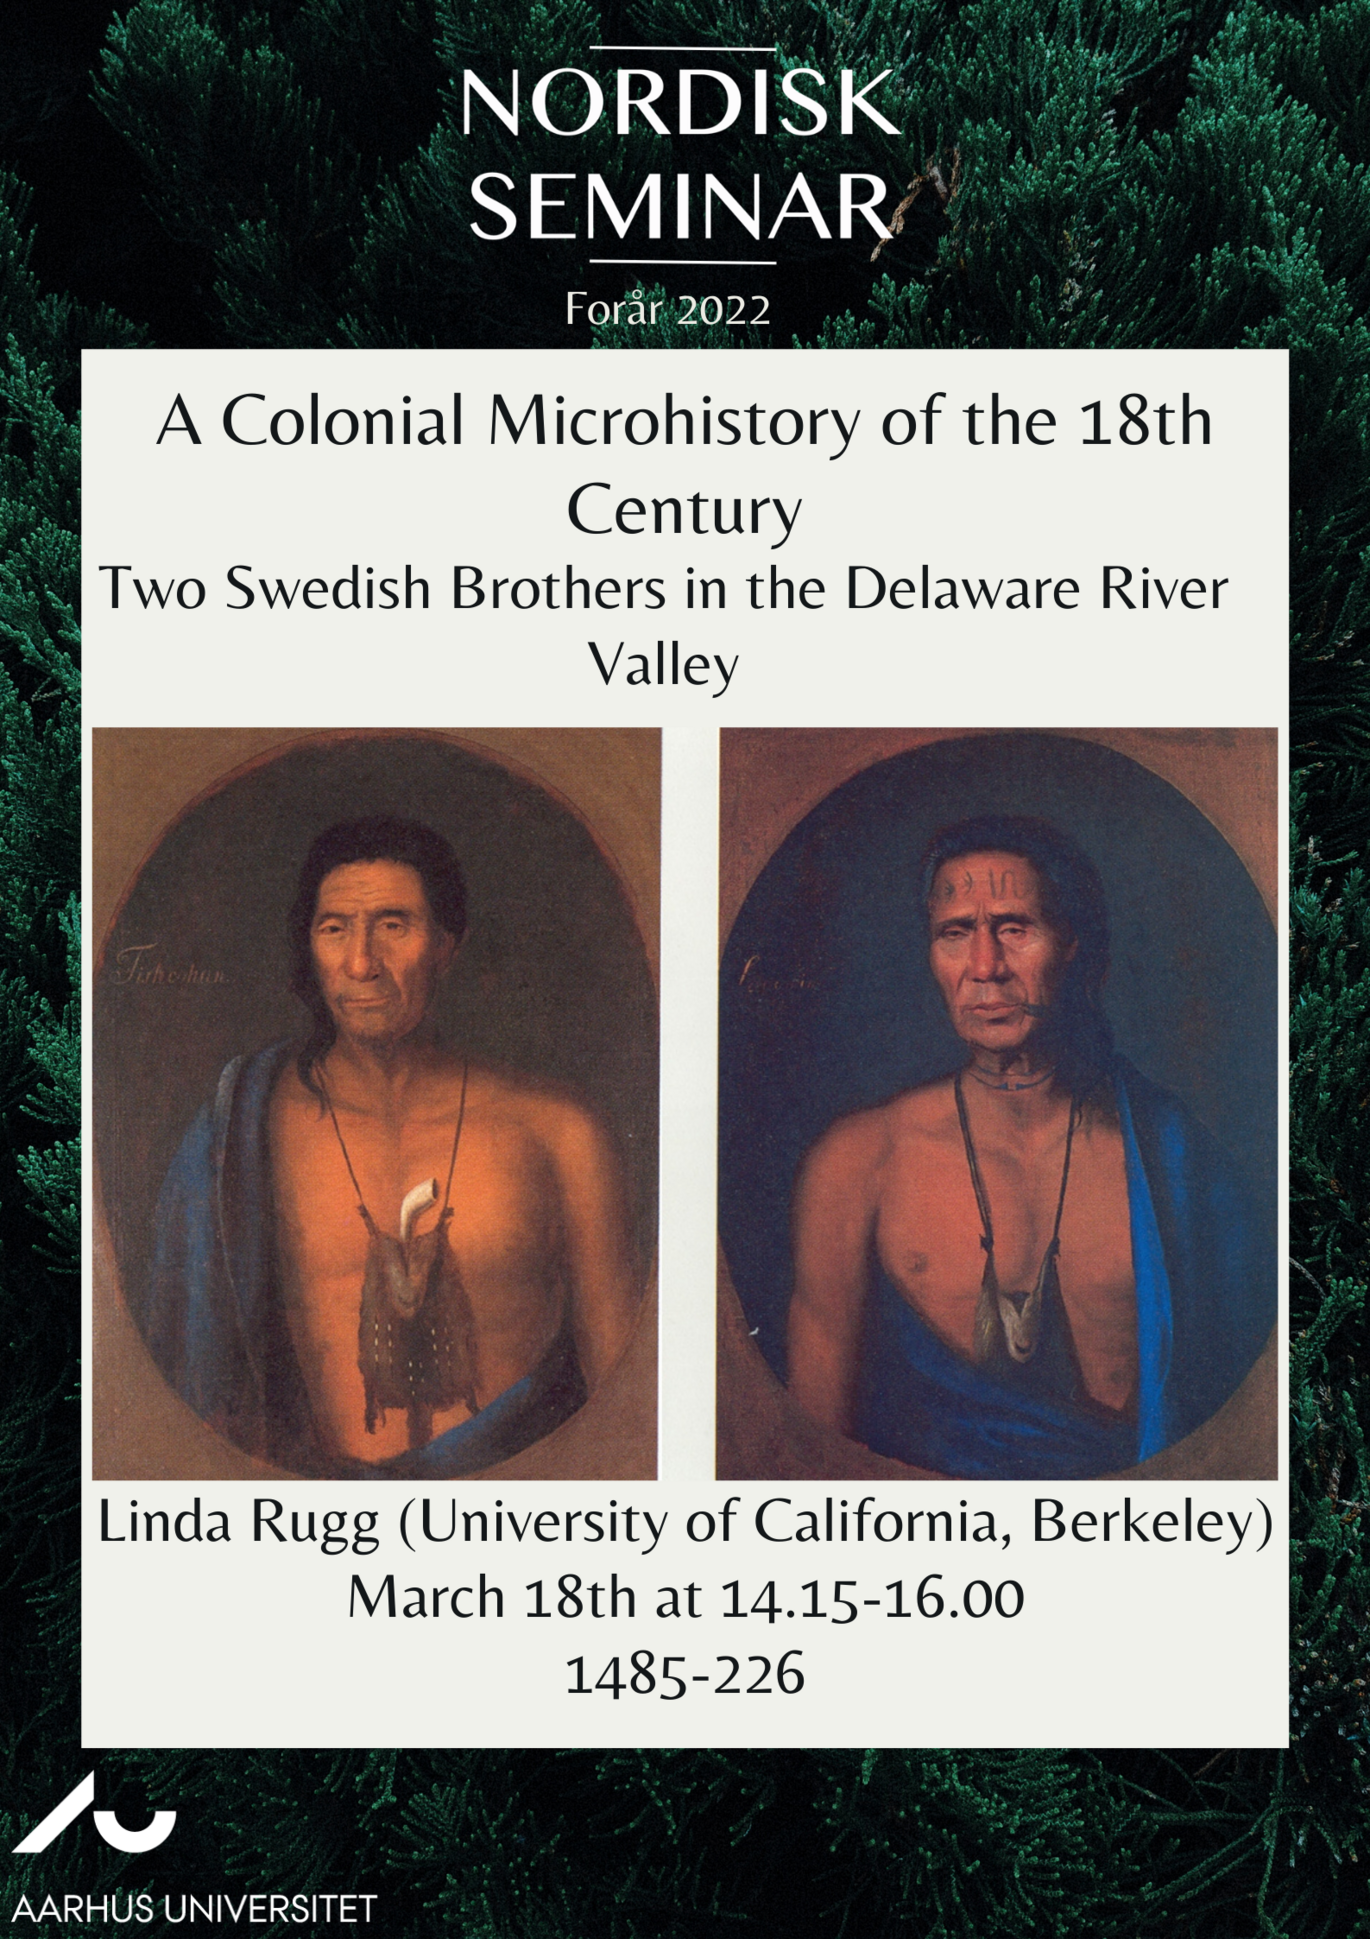 Nordisk Seminar: A Colonial Microhistory of the 18th Century; Two Swedish Brothers in the Delaware River Valley. Linda Rugg (University of California, Berkeley) March 18th at 14.15-16.00, lokale 1485-226